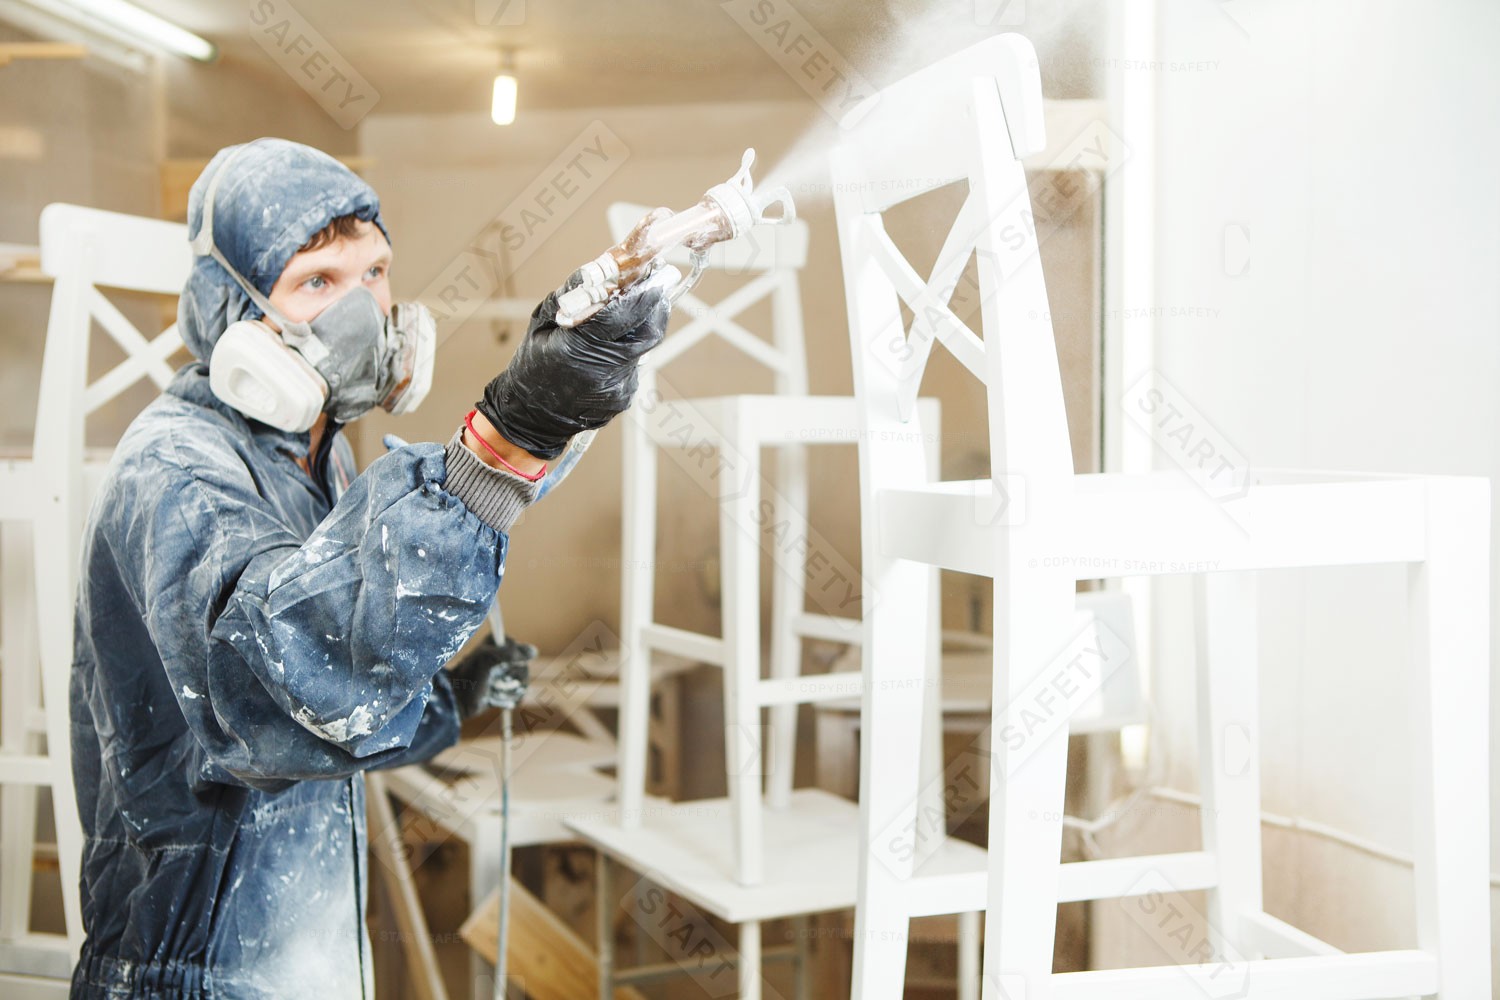 Using A Half Mask Respirator To Protect From Paint Fumes